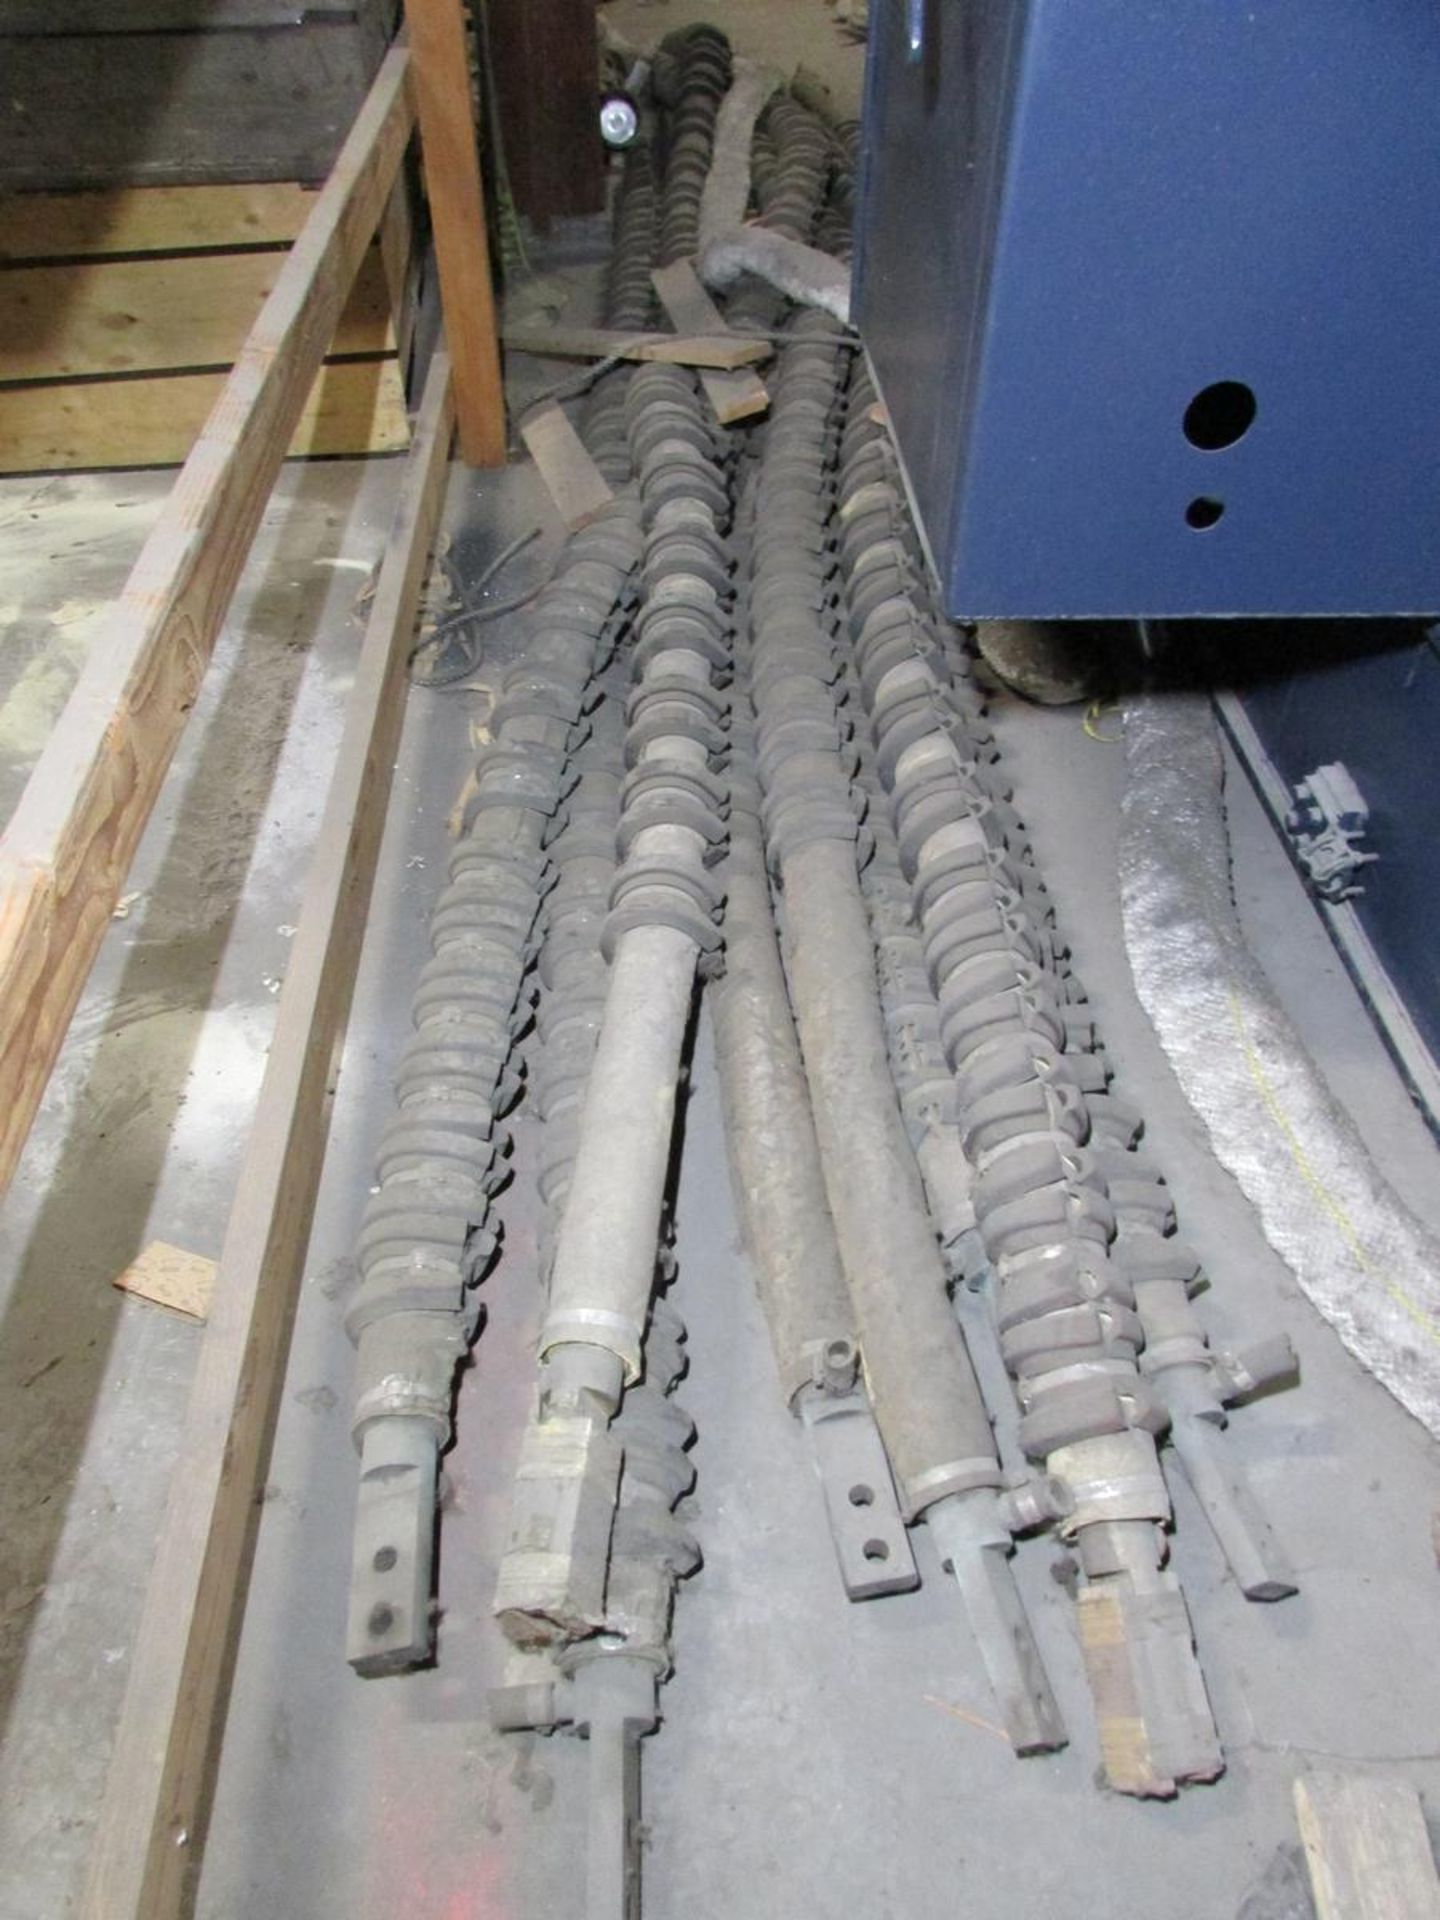 Lot of Furnace Transformer Electrical Cables - Image 4 of 9